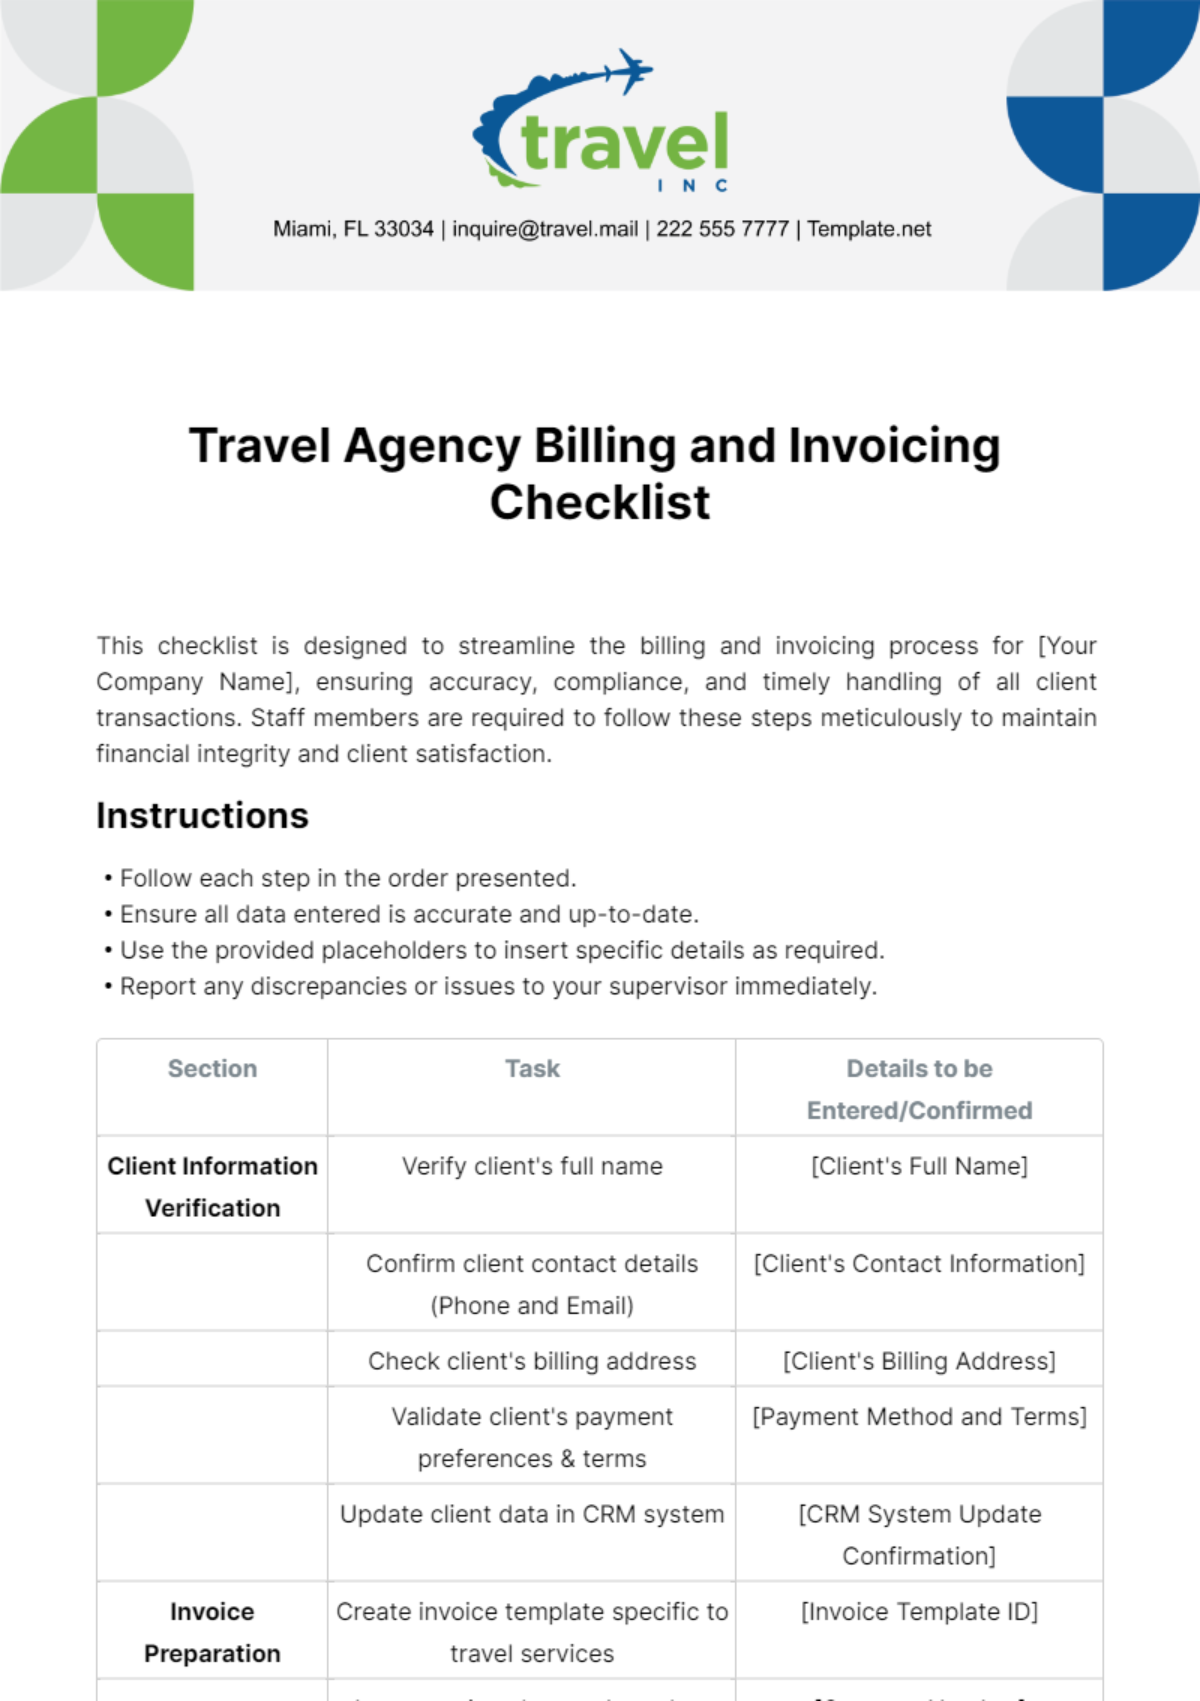 Free Travel Agency Billing and Invoicing Checklist Template